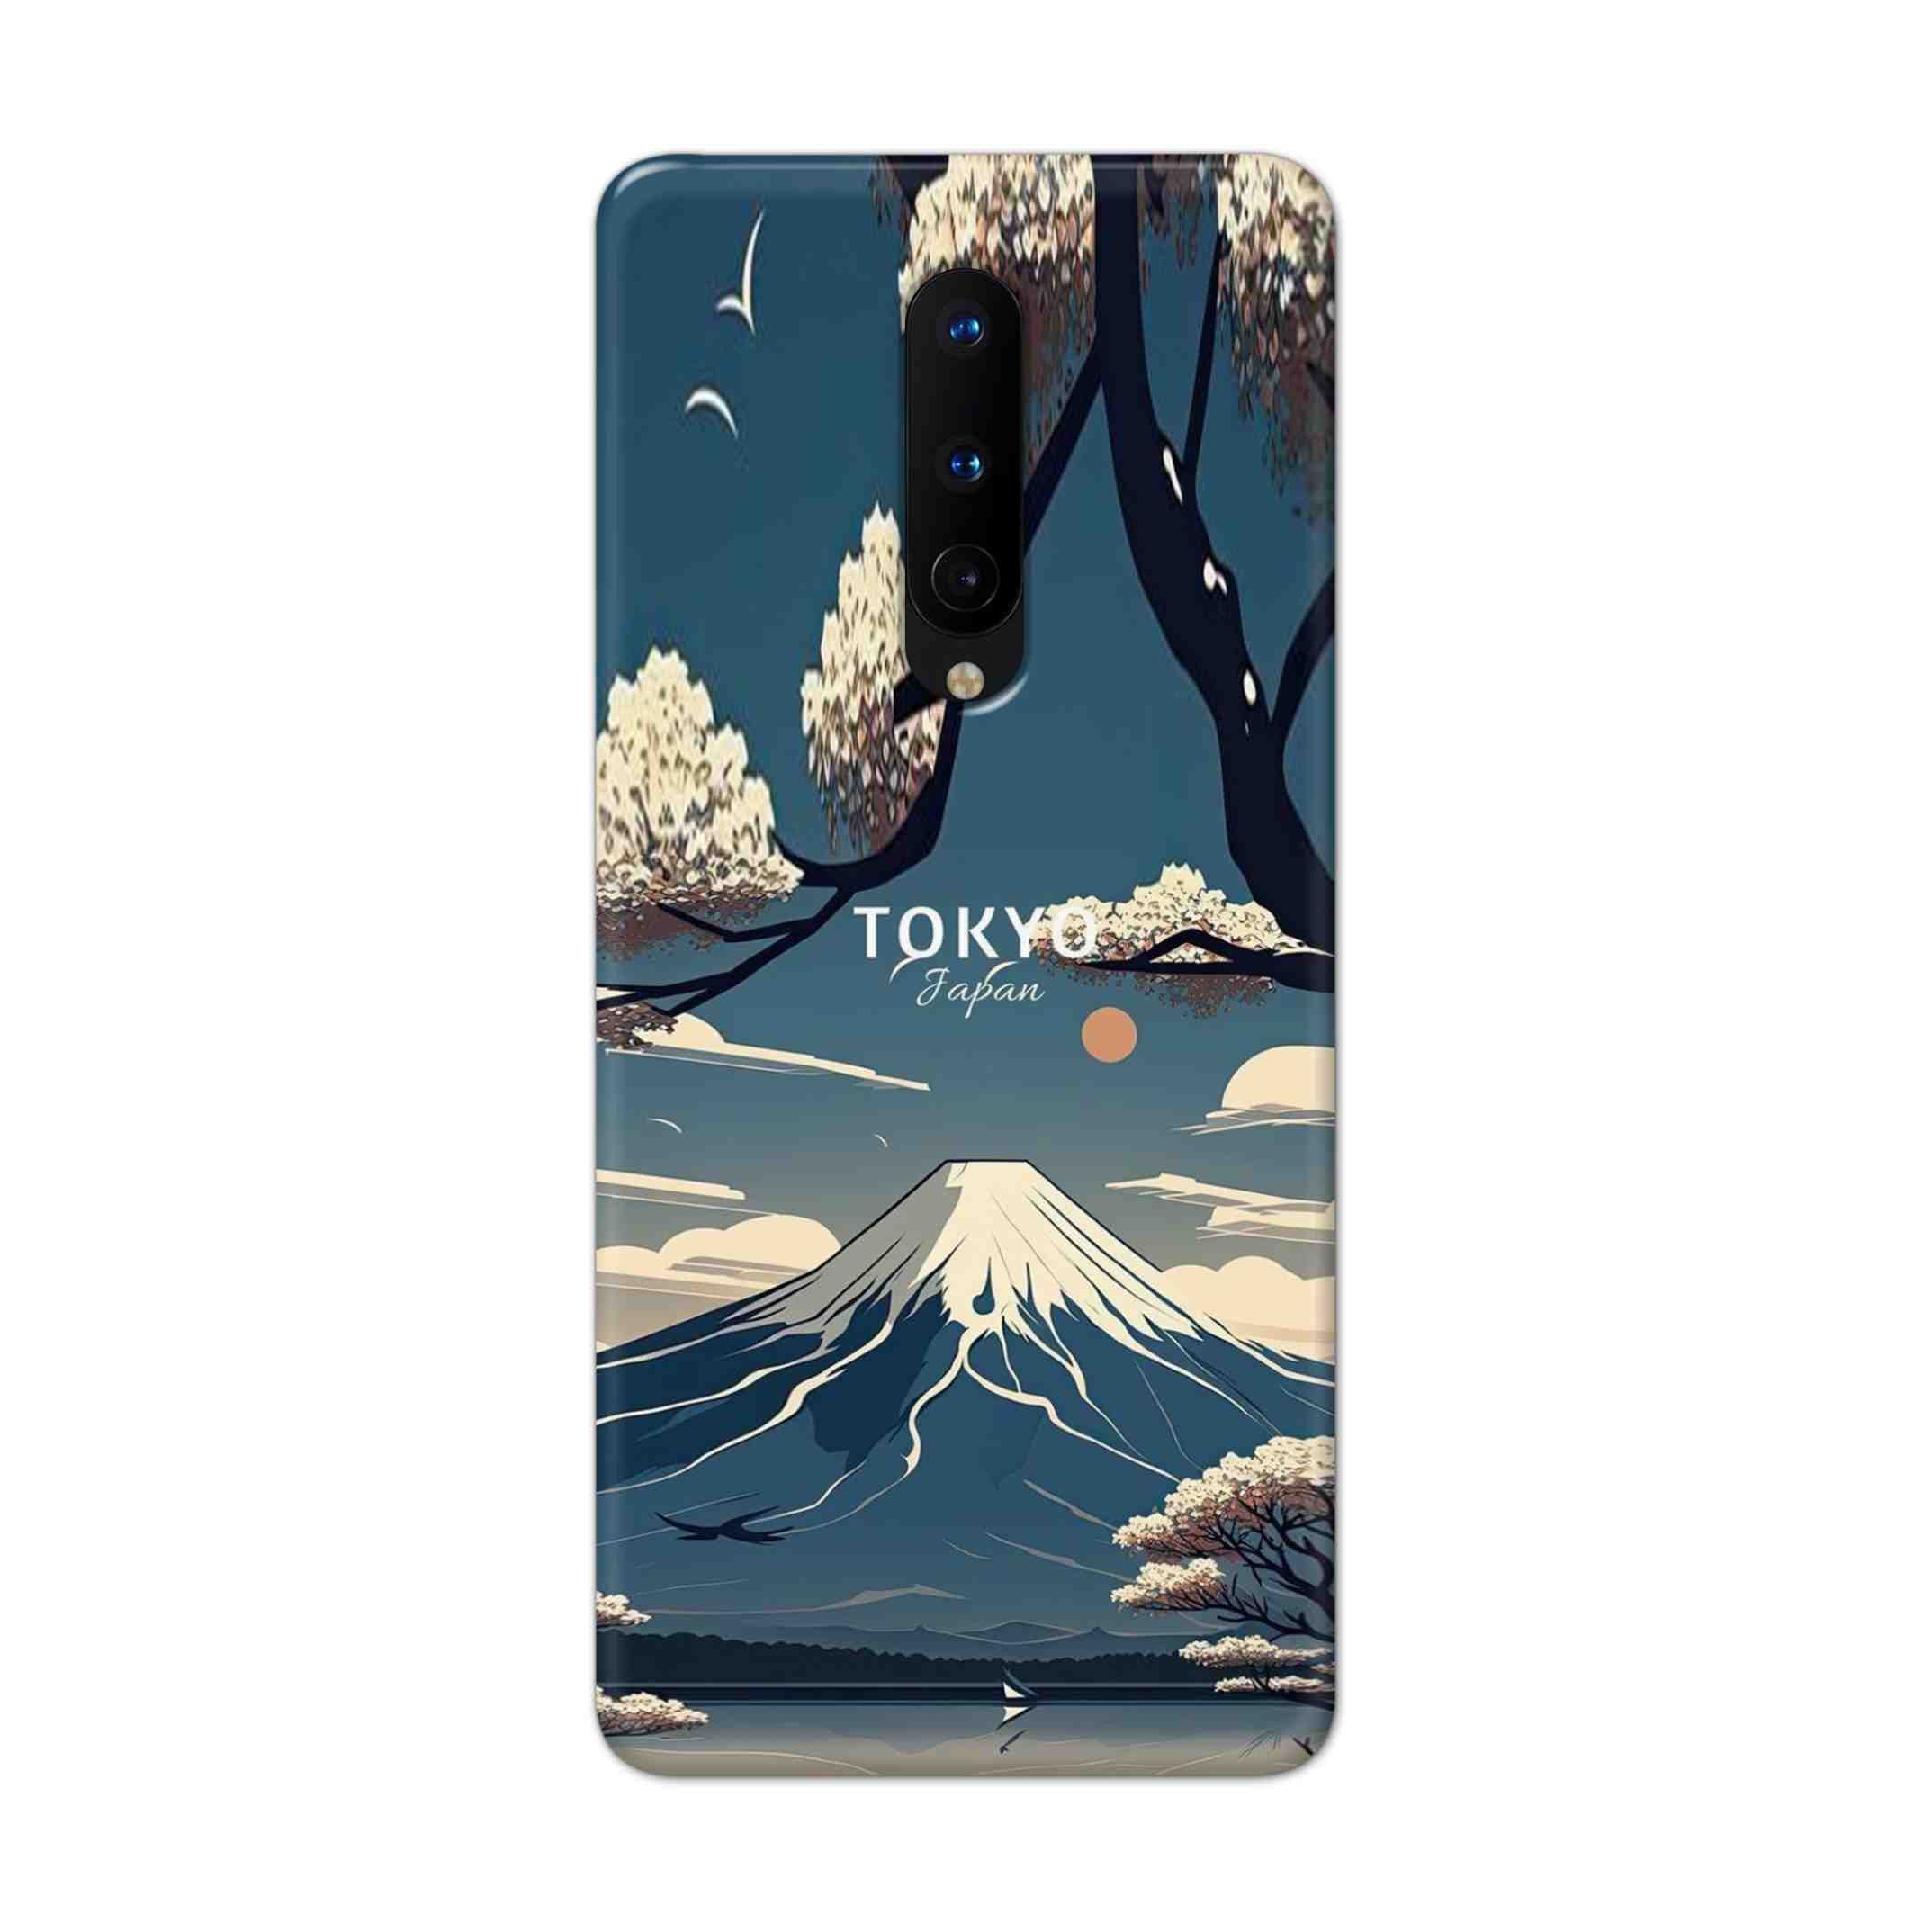 Buy Tokyo Hard Back Mobile Phone Case Cover For OnePlus 8 Online